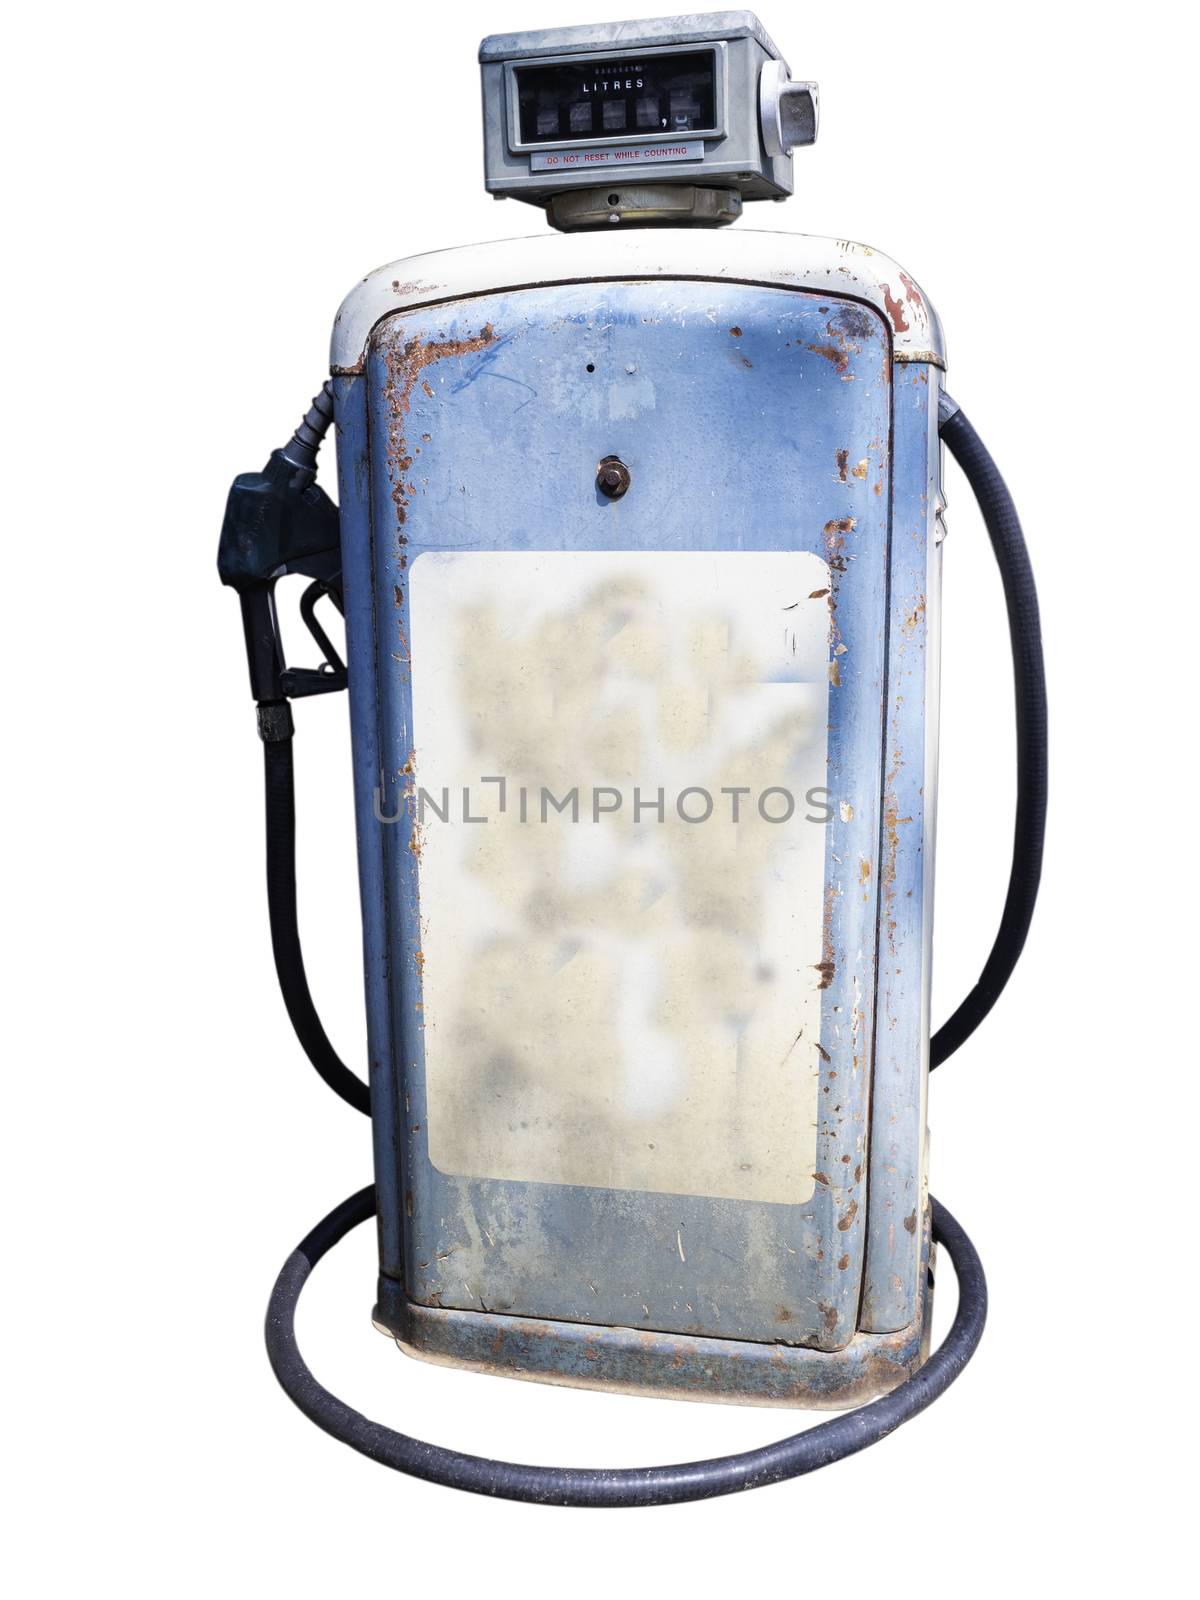 Isolate Vintage Fuel Pump on white background with clipping path by panyajampatong